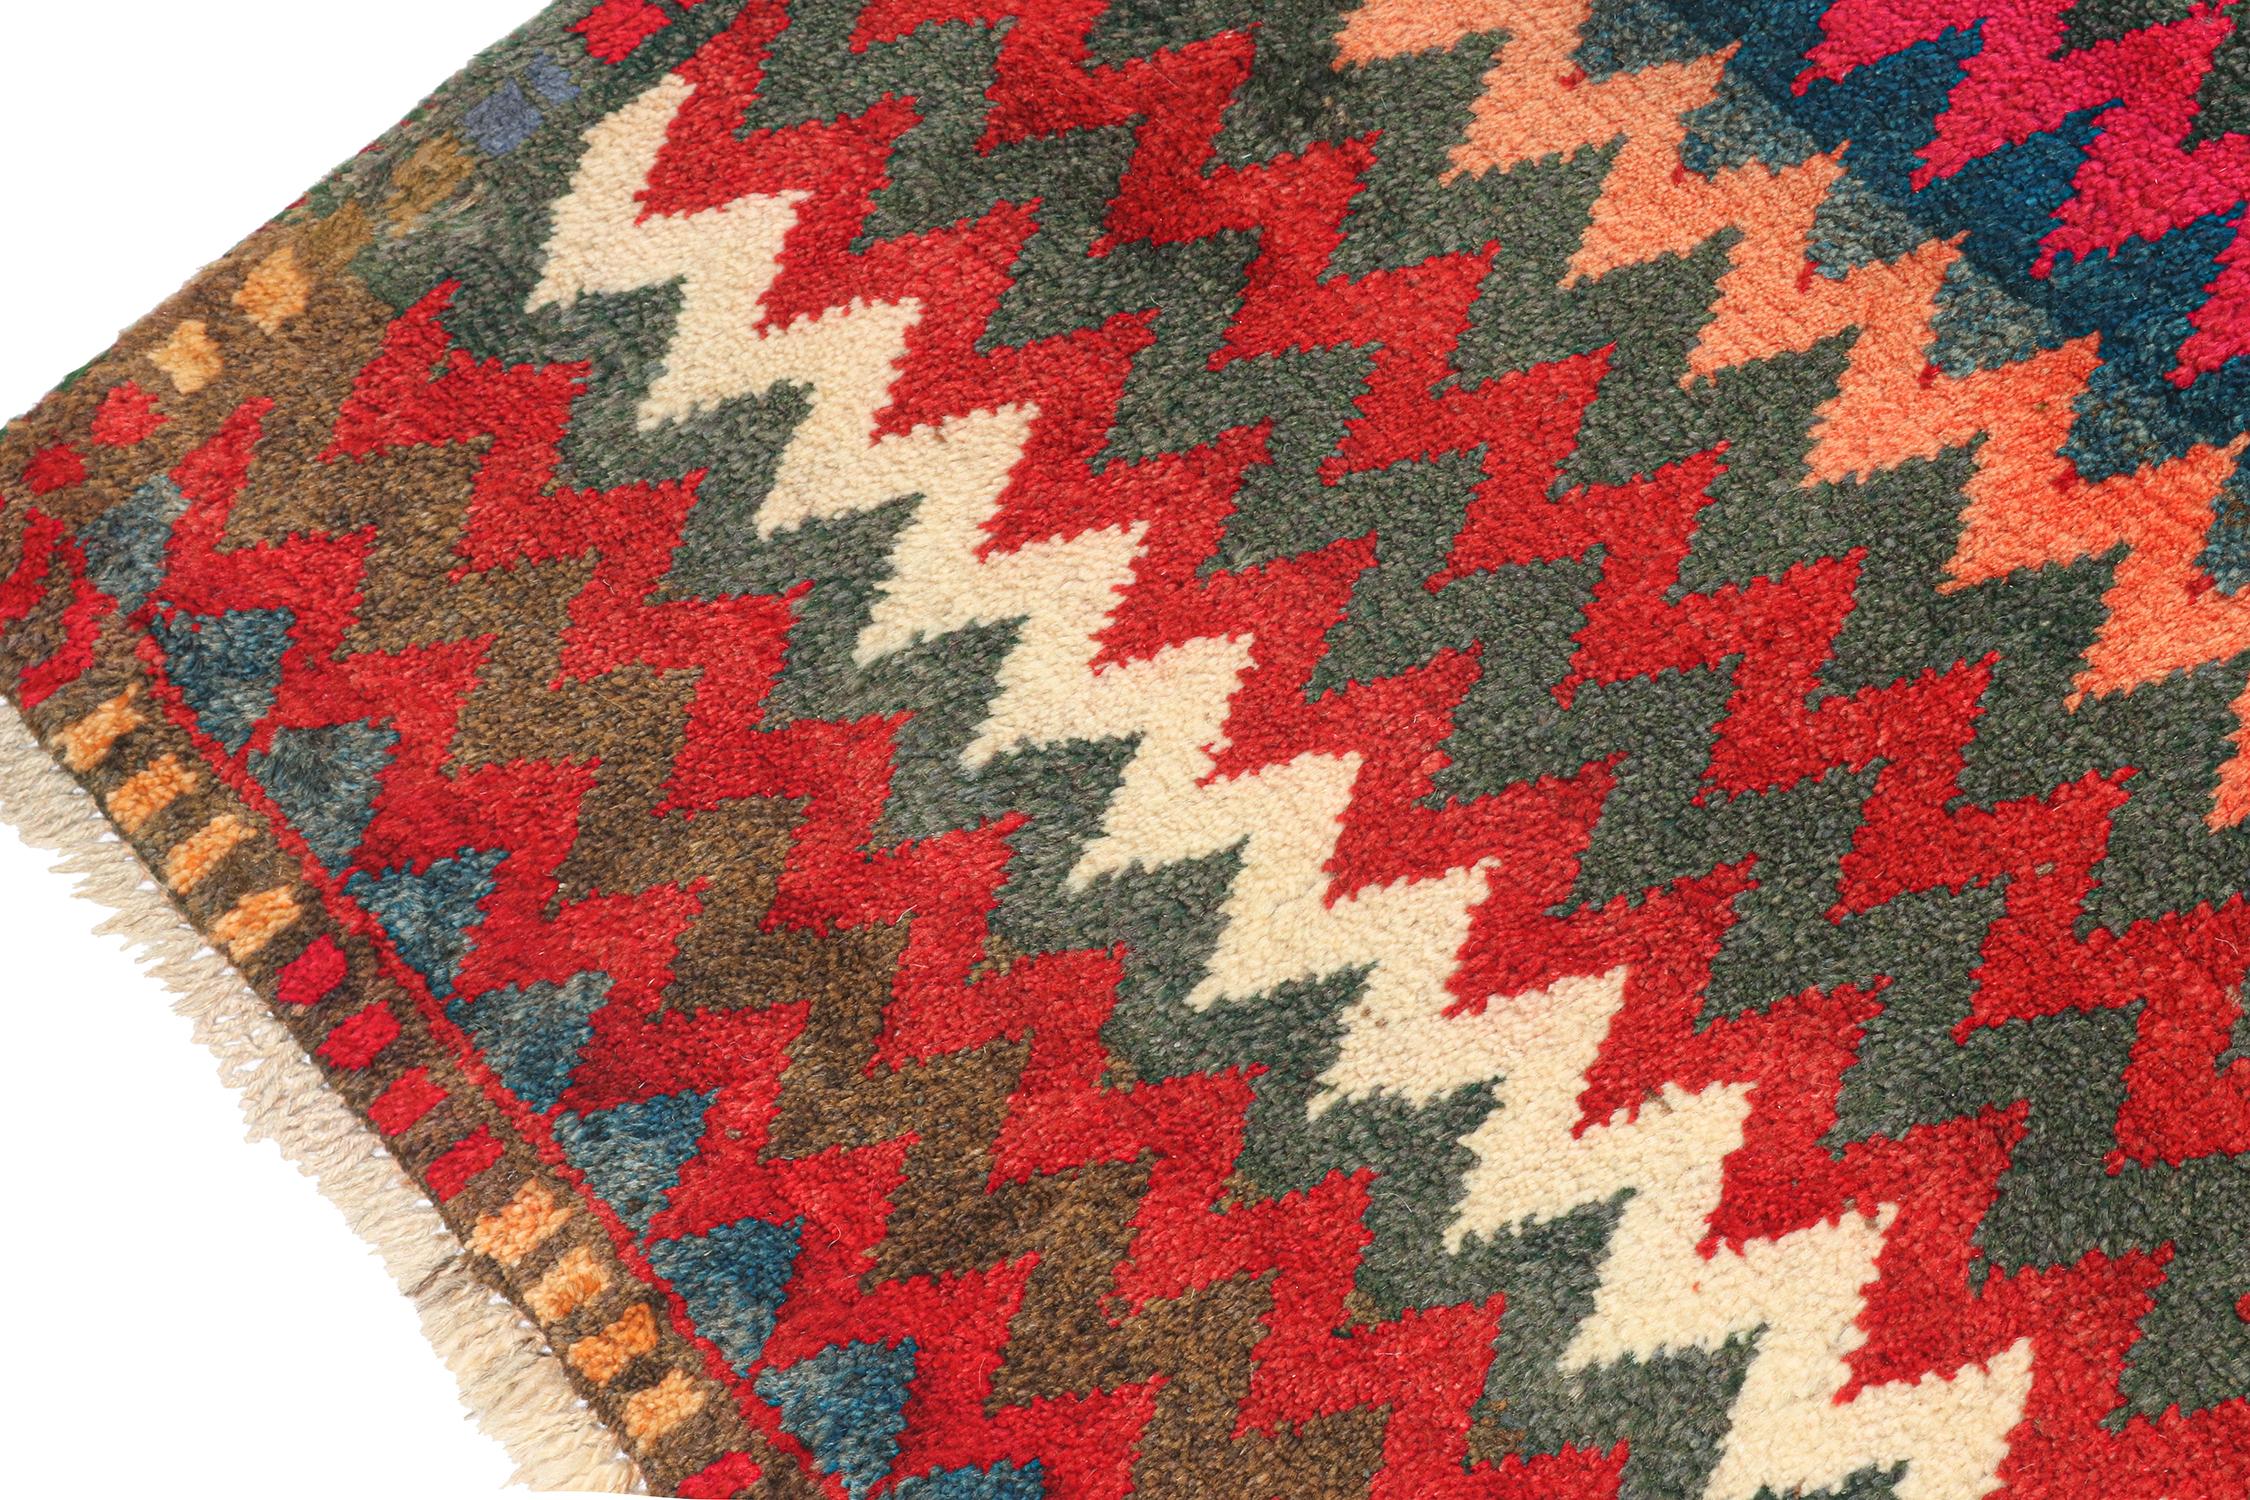 Vintage Gabbeh Persian Tribal Rug in Vibrant Chevron Patterns by Rug & Kilim In Good Condition For Sale In Long Island City, NY